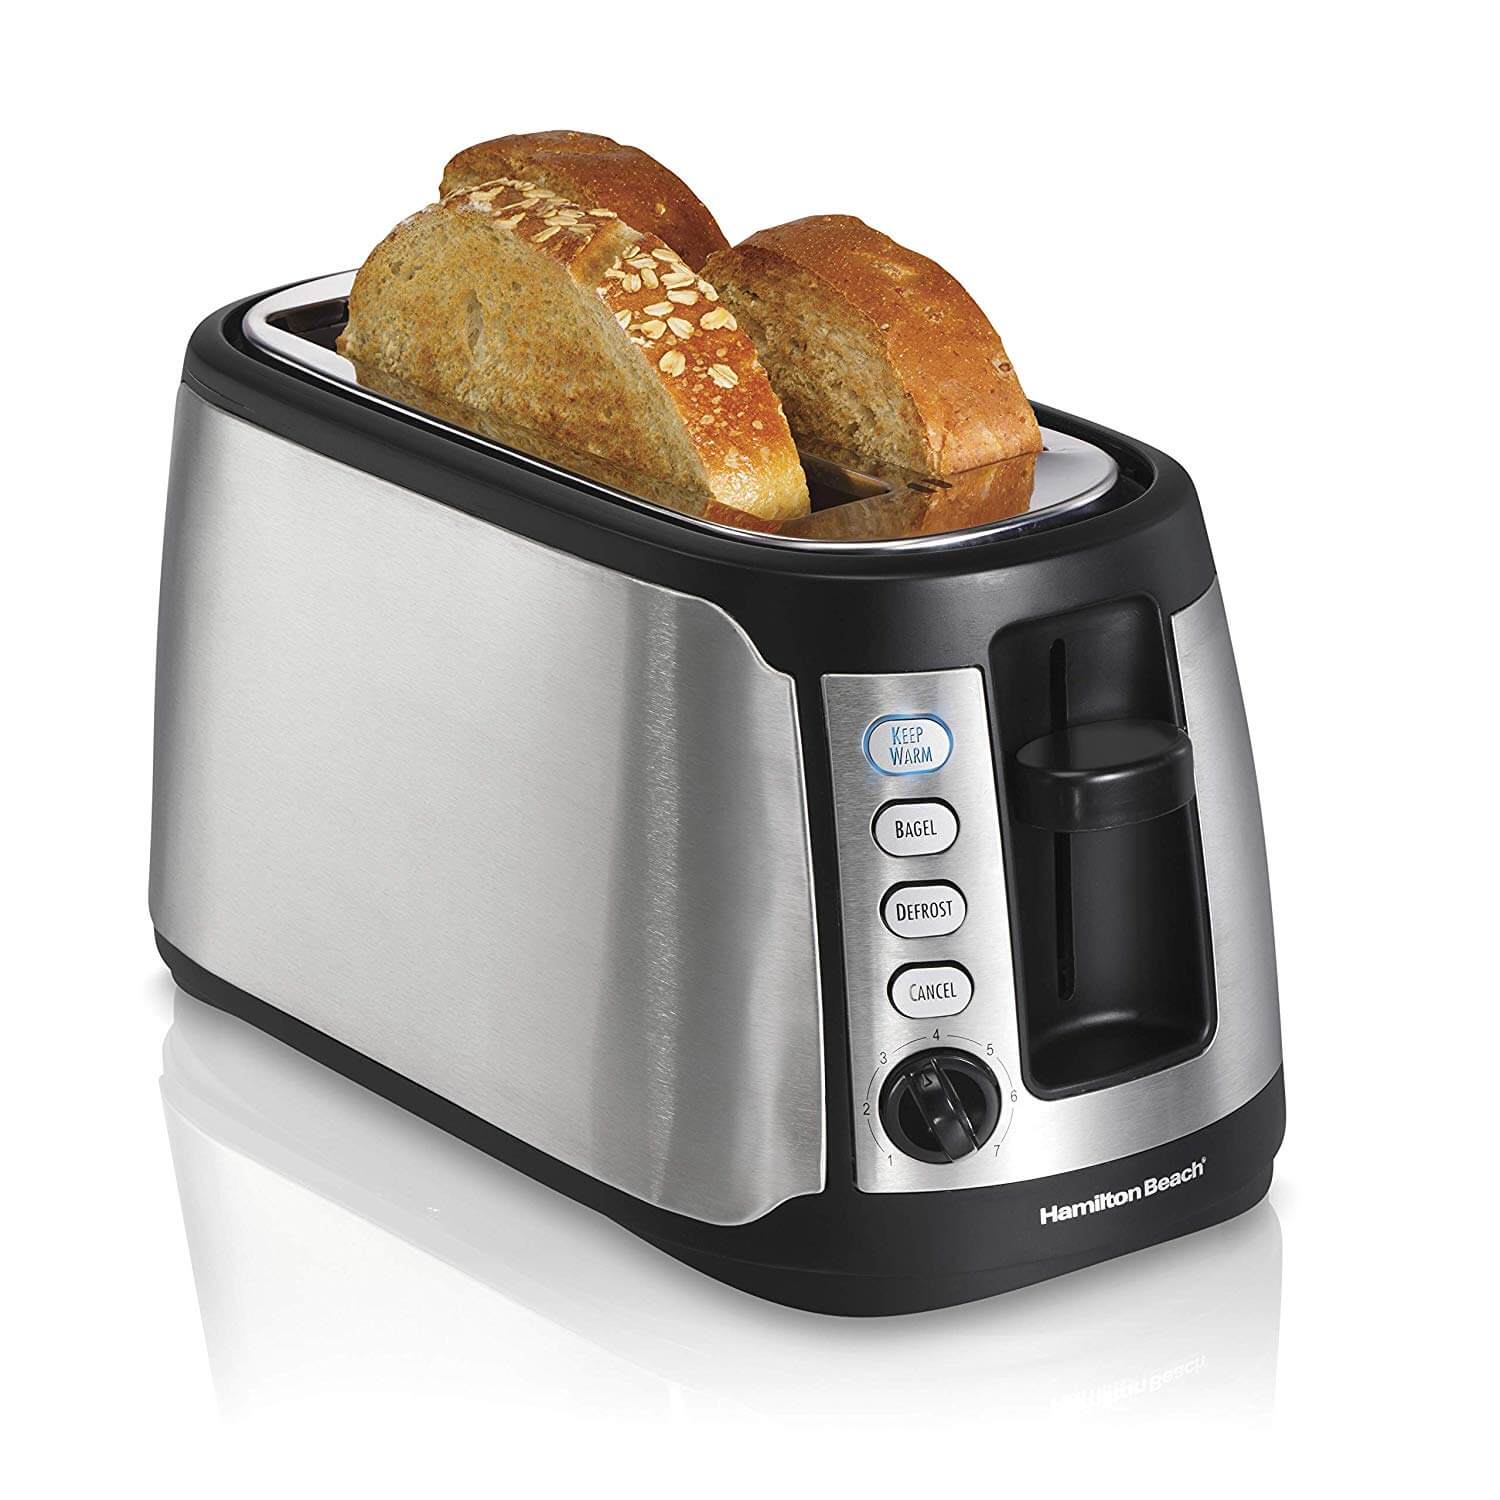 Elite Cuisine 4 Slice Cool-Touch Long Toaster [ECT-4829]